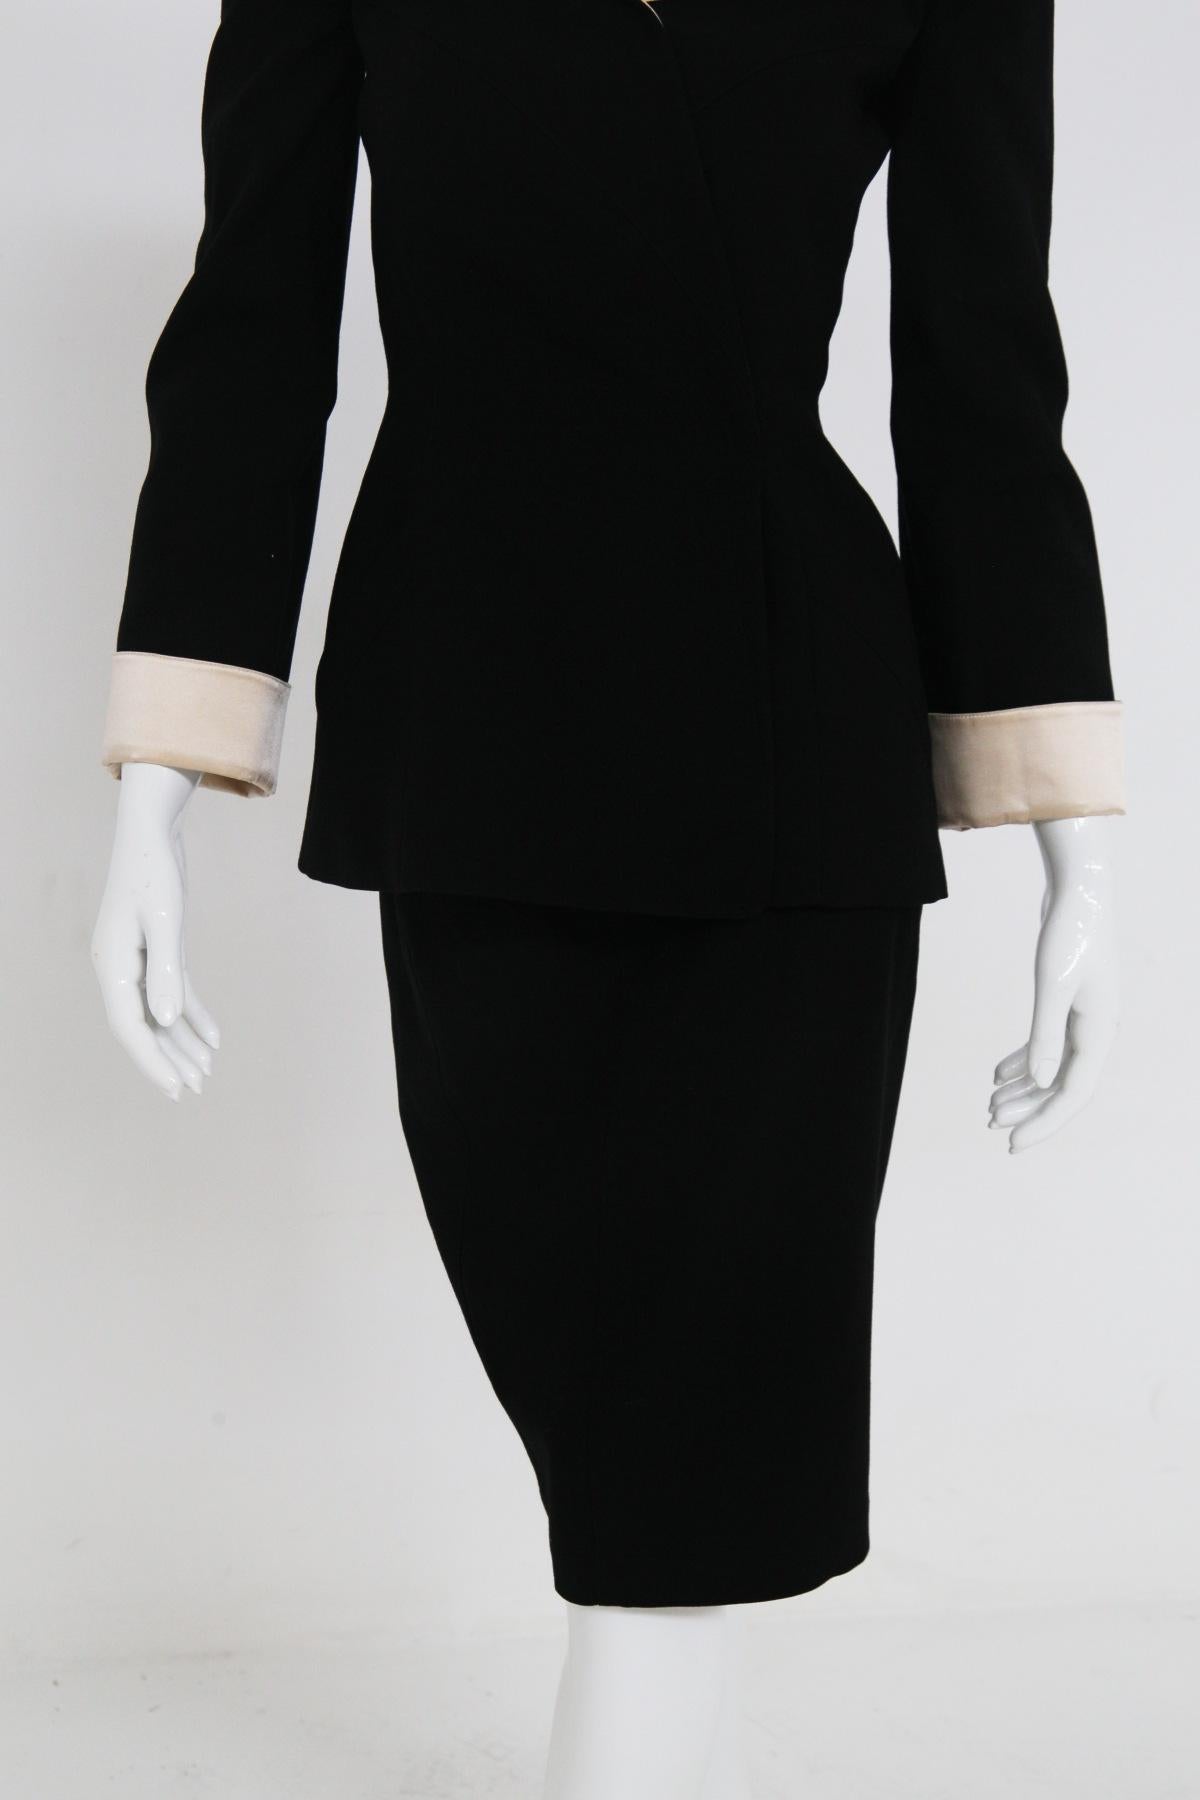 Fine Thierry Mugler Vintage Tailleur in Pure Black Silk and Champagne 3